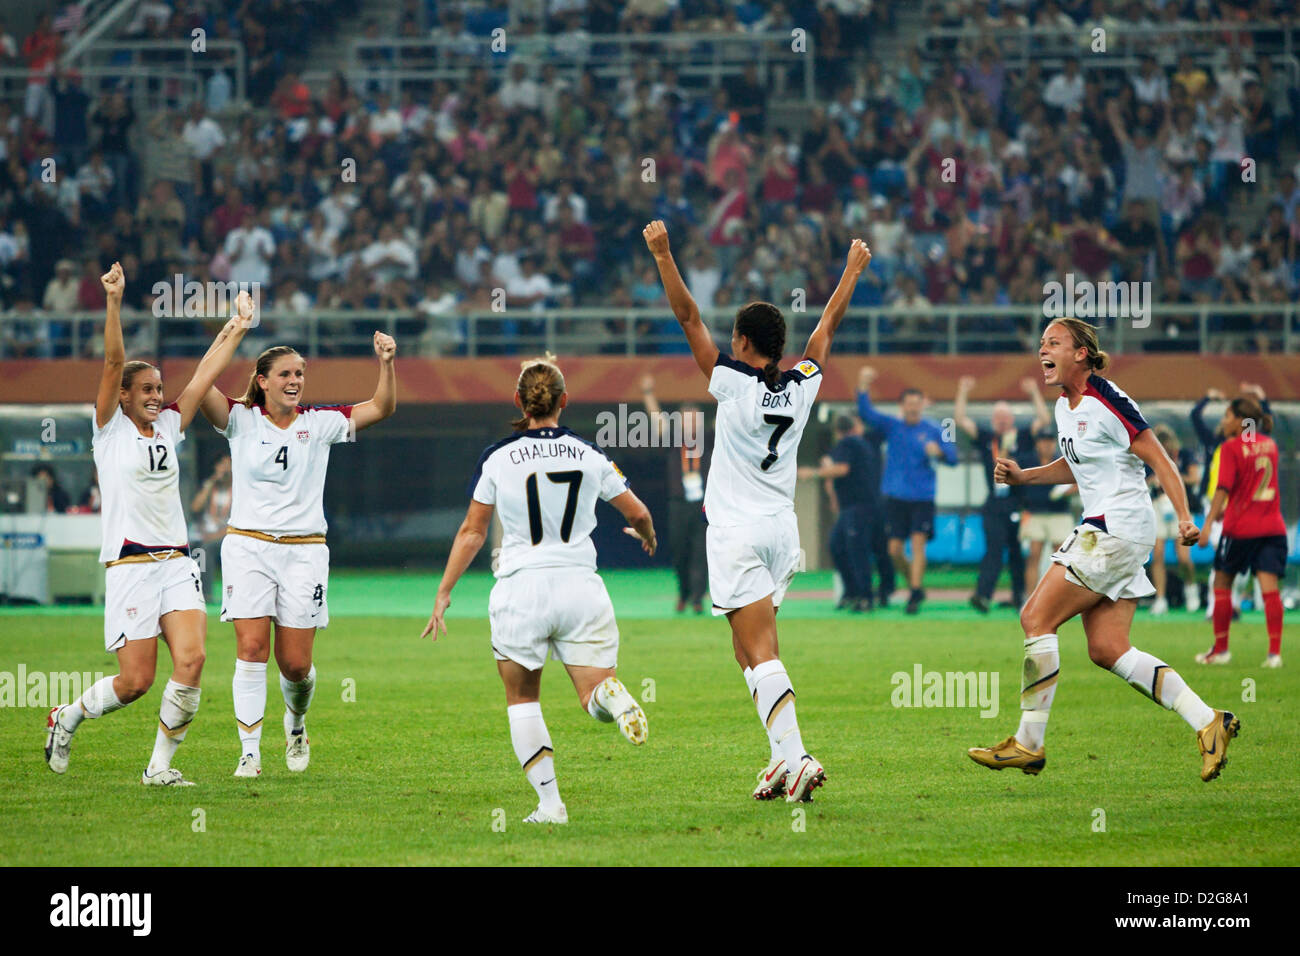 Shannon Boxx of the United States (7) celebrates with teammates after scoring a goal against England in the Women's World Cup Stock Photo